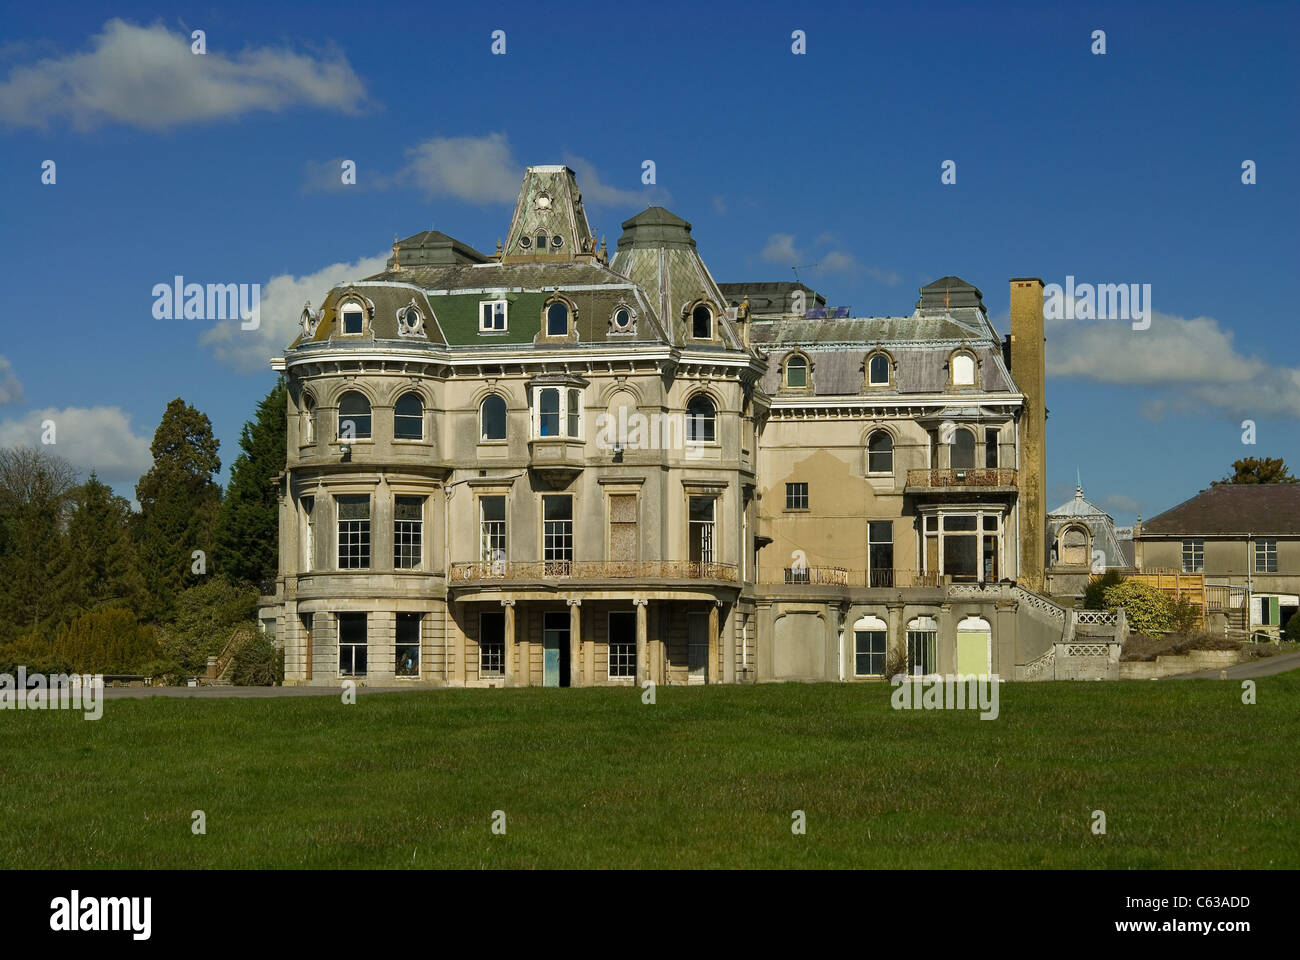 Grand old renaissance period house in berkshire, england near Henley-on-Thames Stock Photo